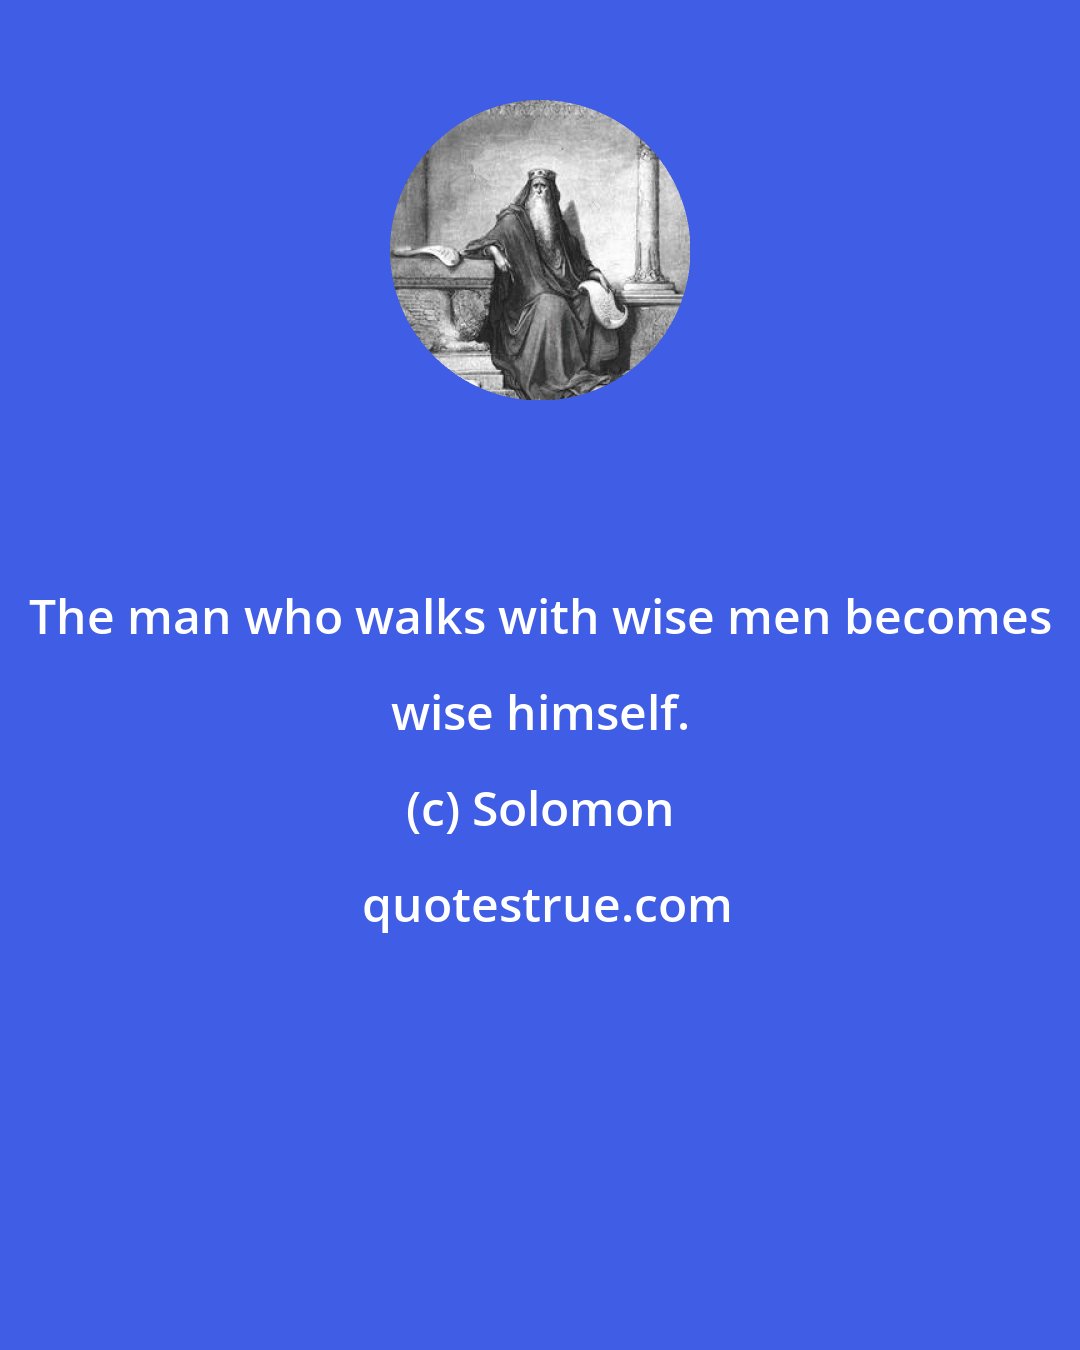 Solomon: The man who walks with wise men becomes wise himself.